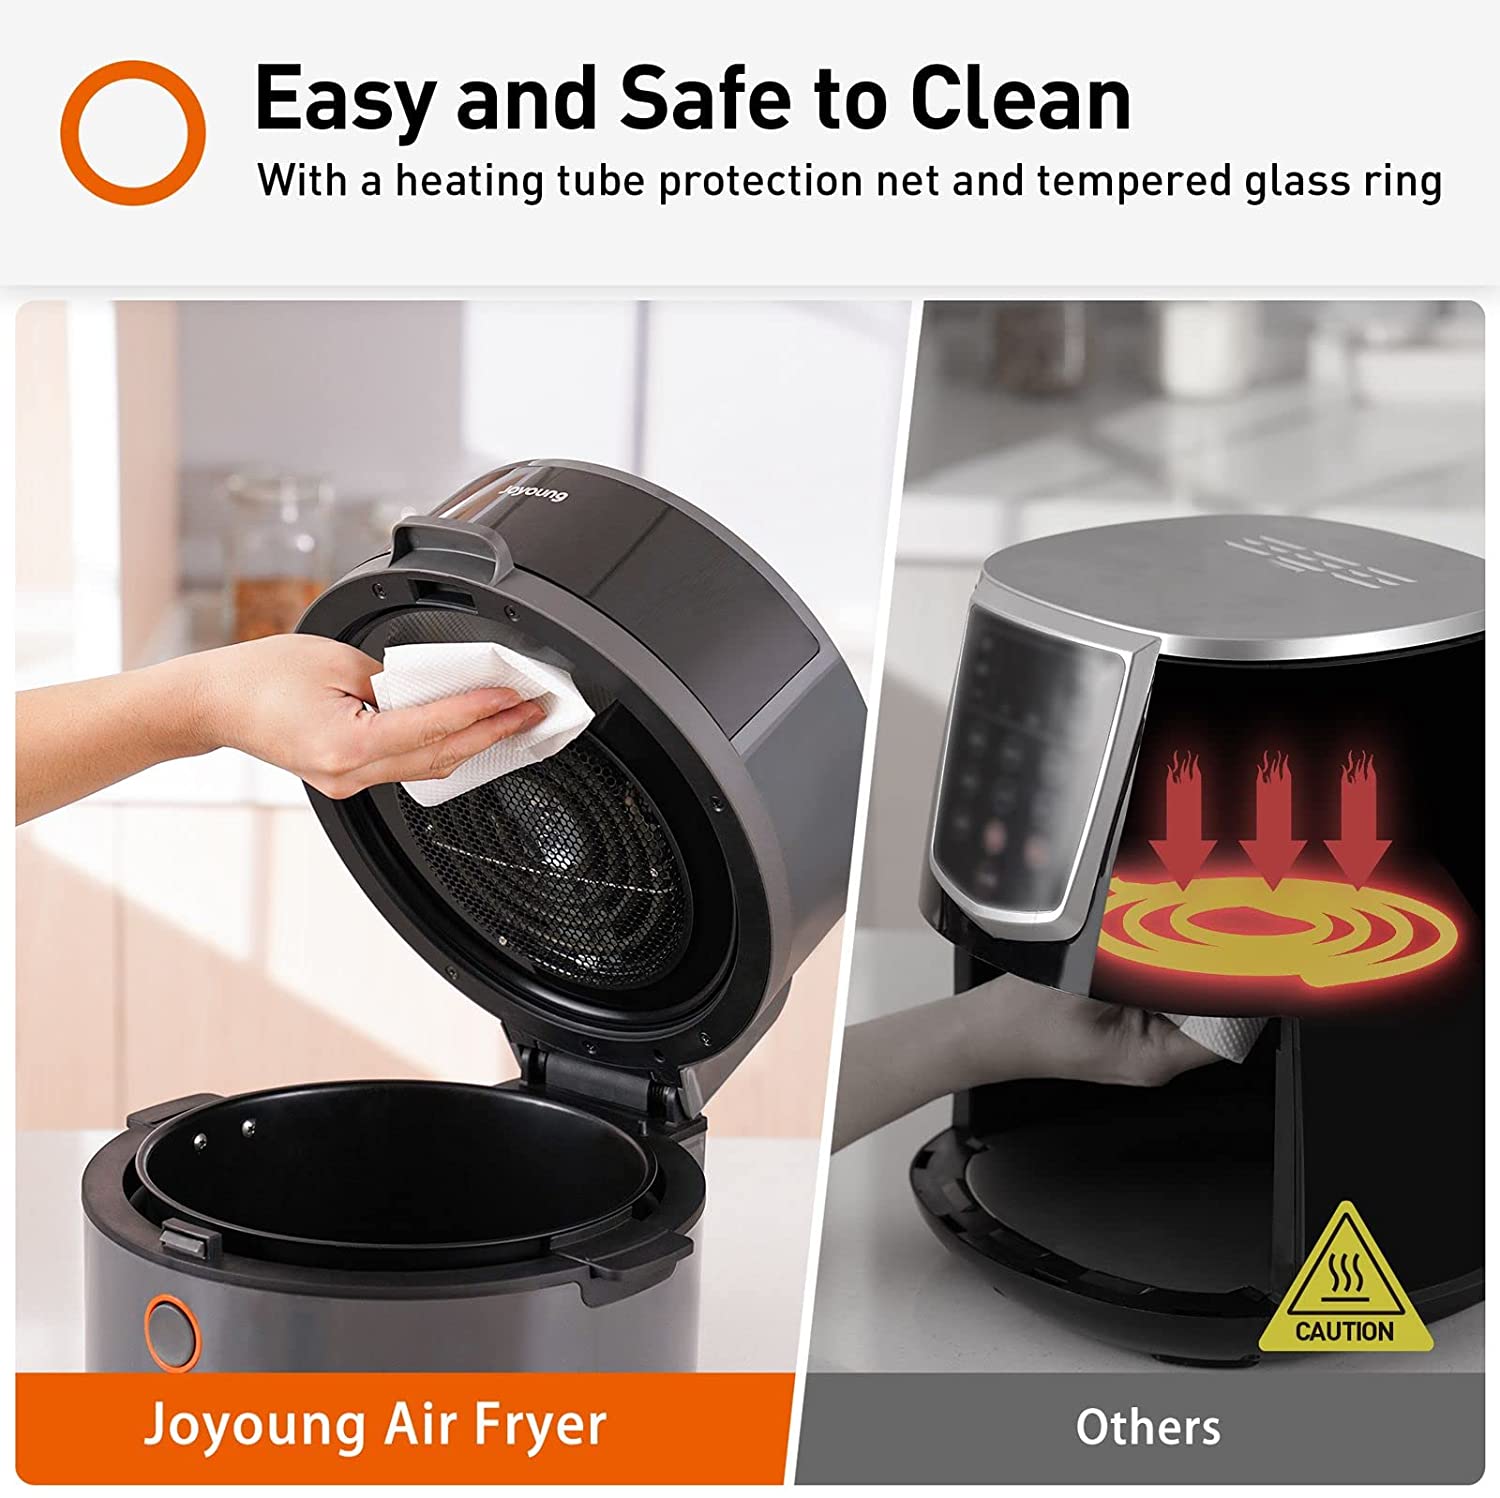 JOYOUNG Air Fryer 10 in 1 Digital Air Fryer Oven 5.8 QT Air Fryer Toaster Oven Oilless Cooker 120° Visible Window Free Recipes